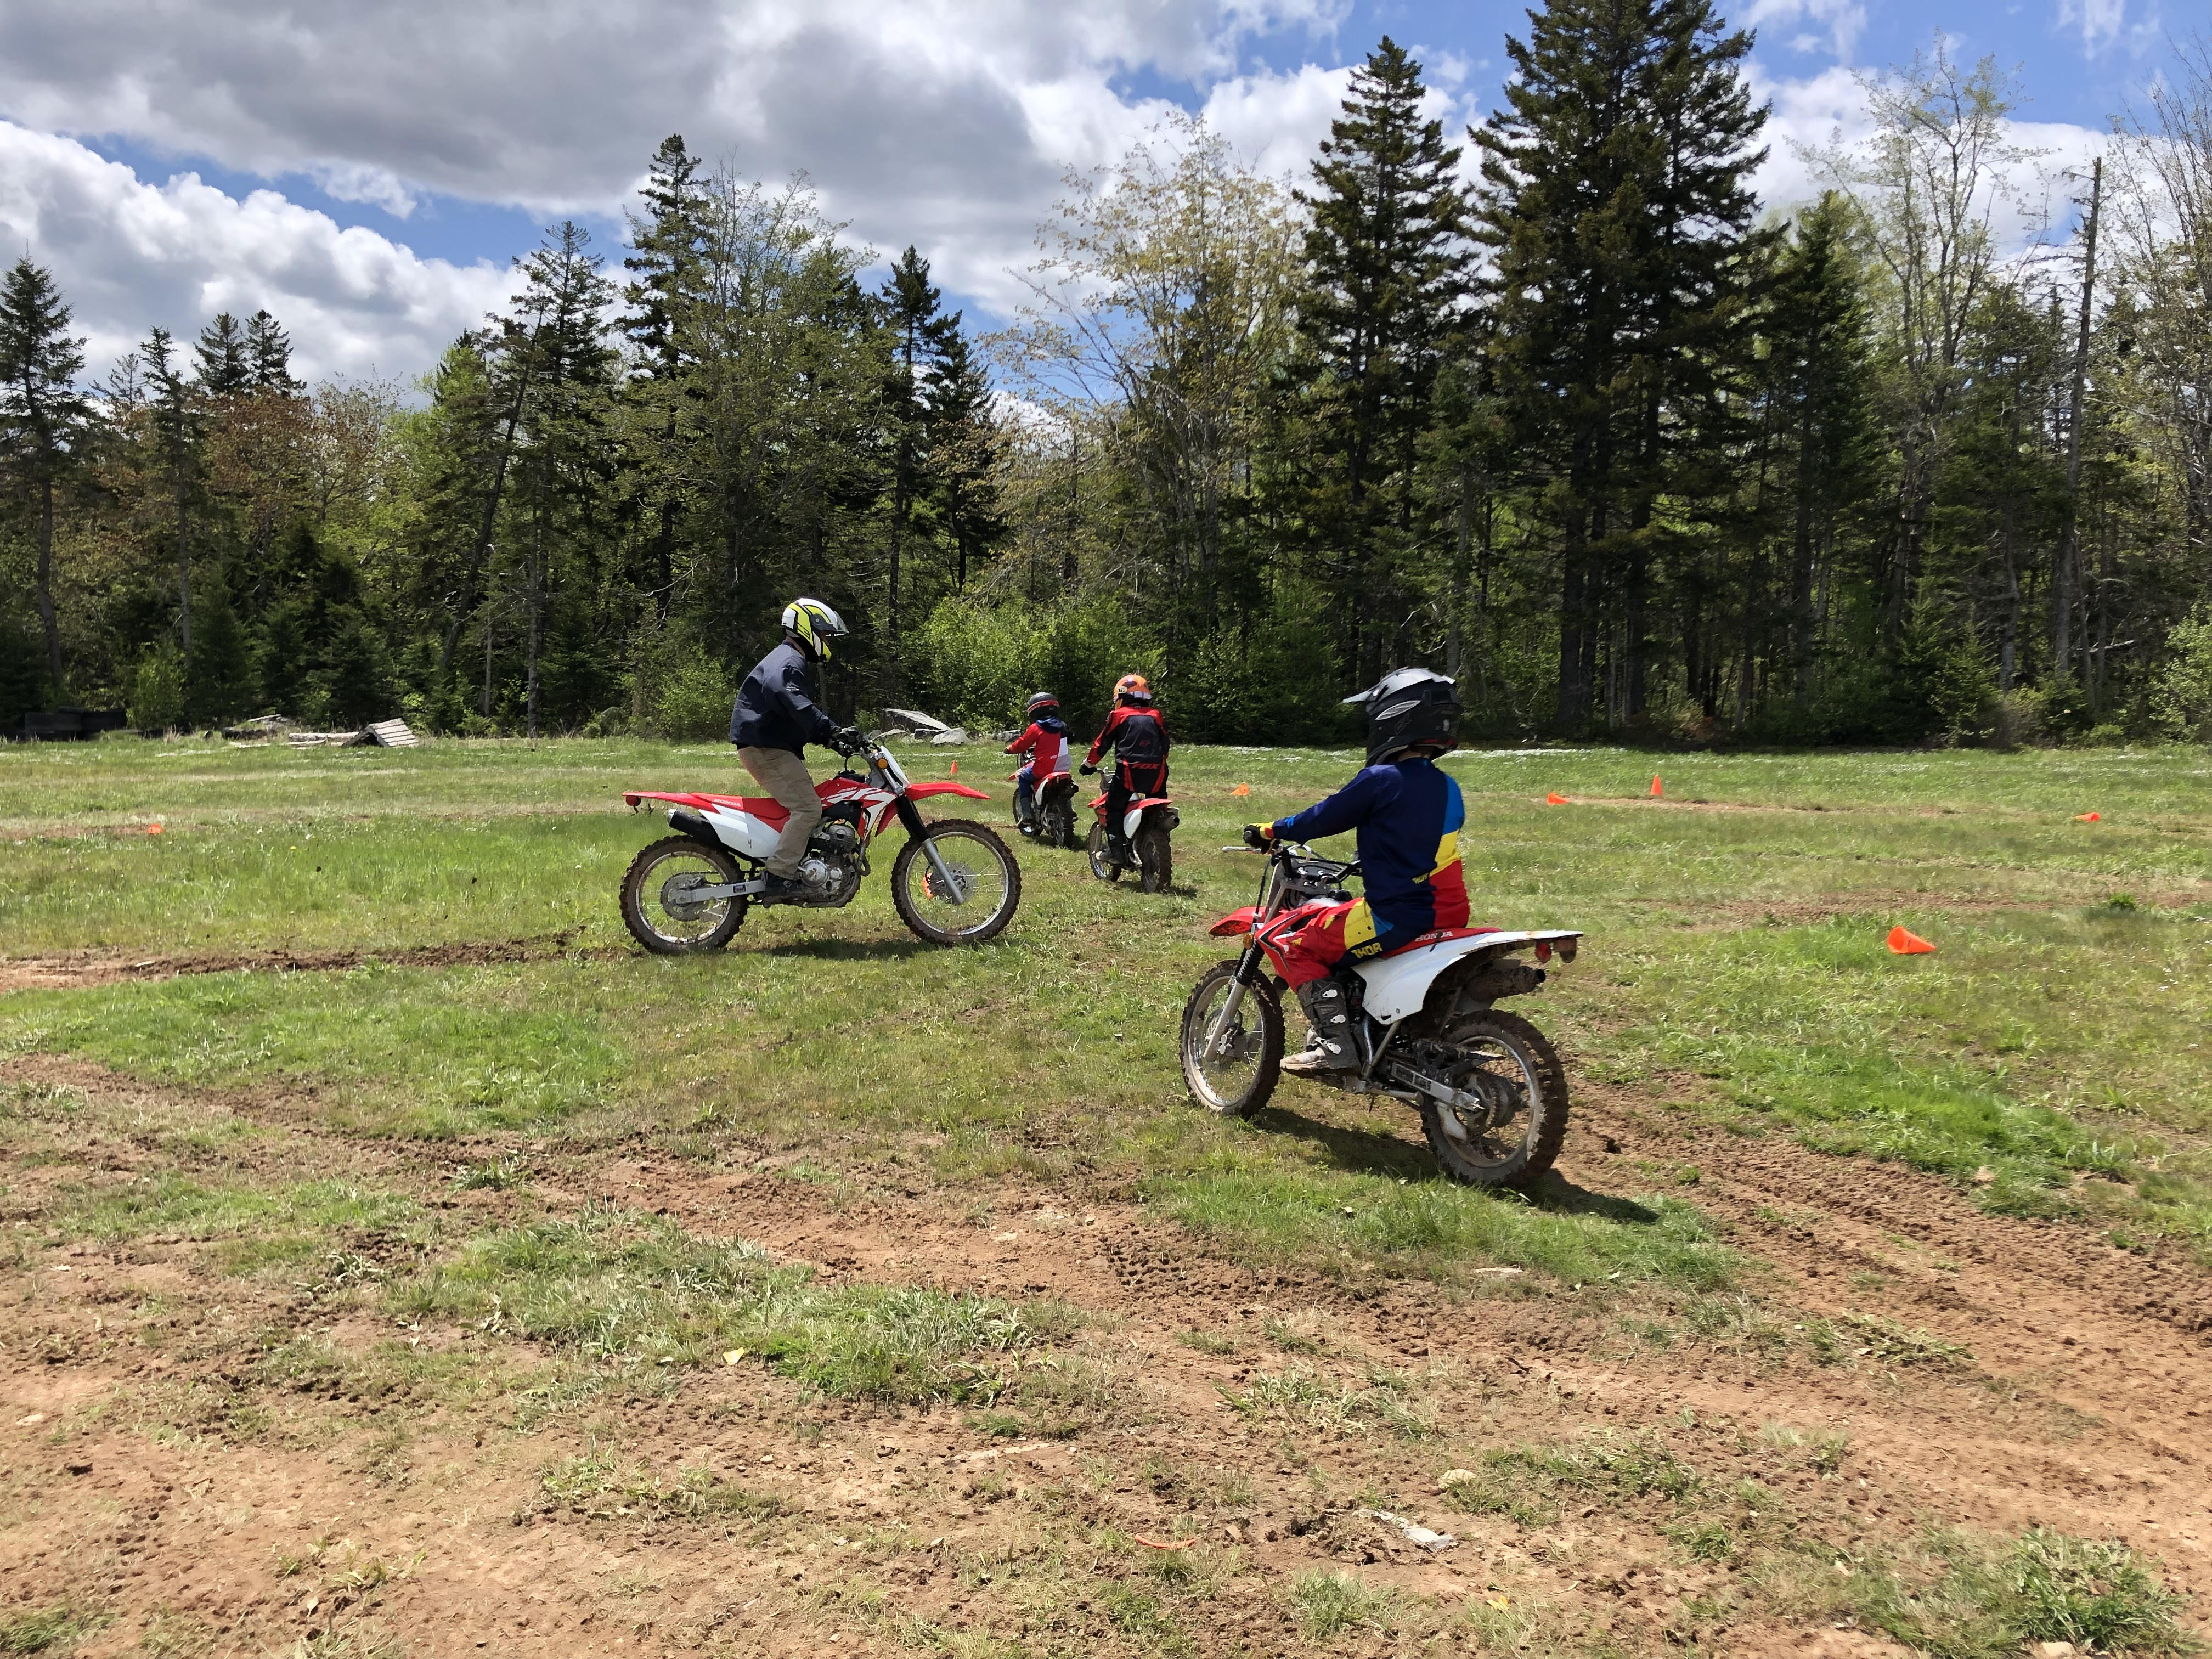 riders on their bikes doing a figure 8